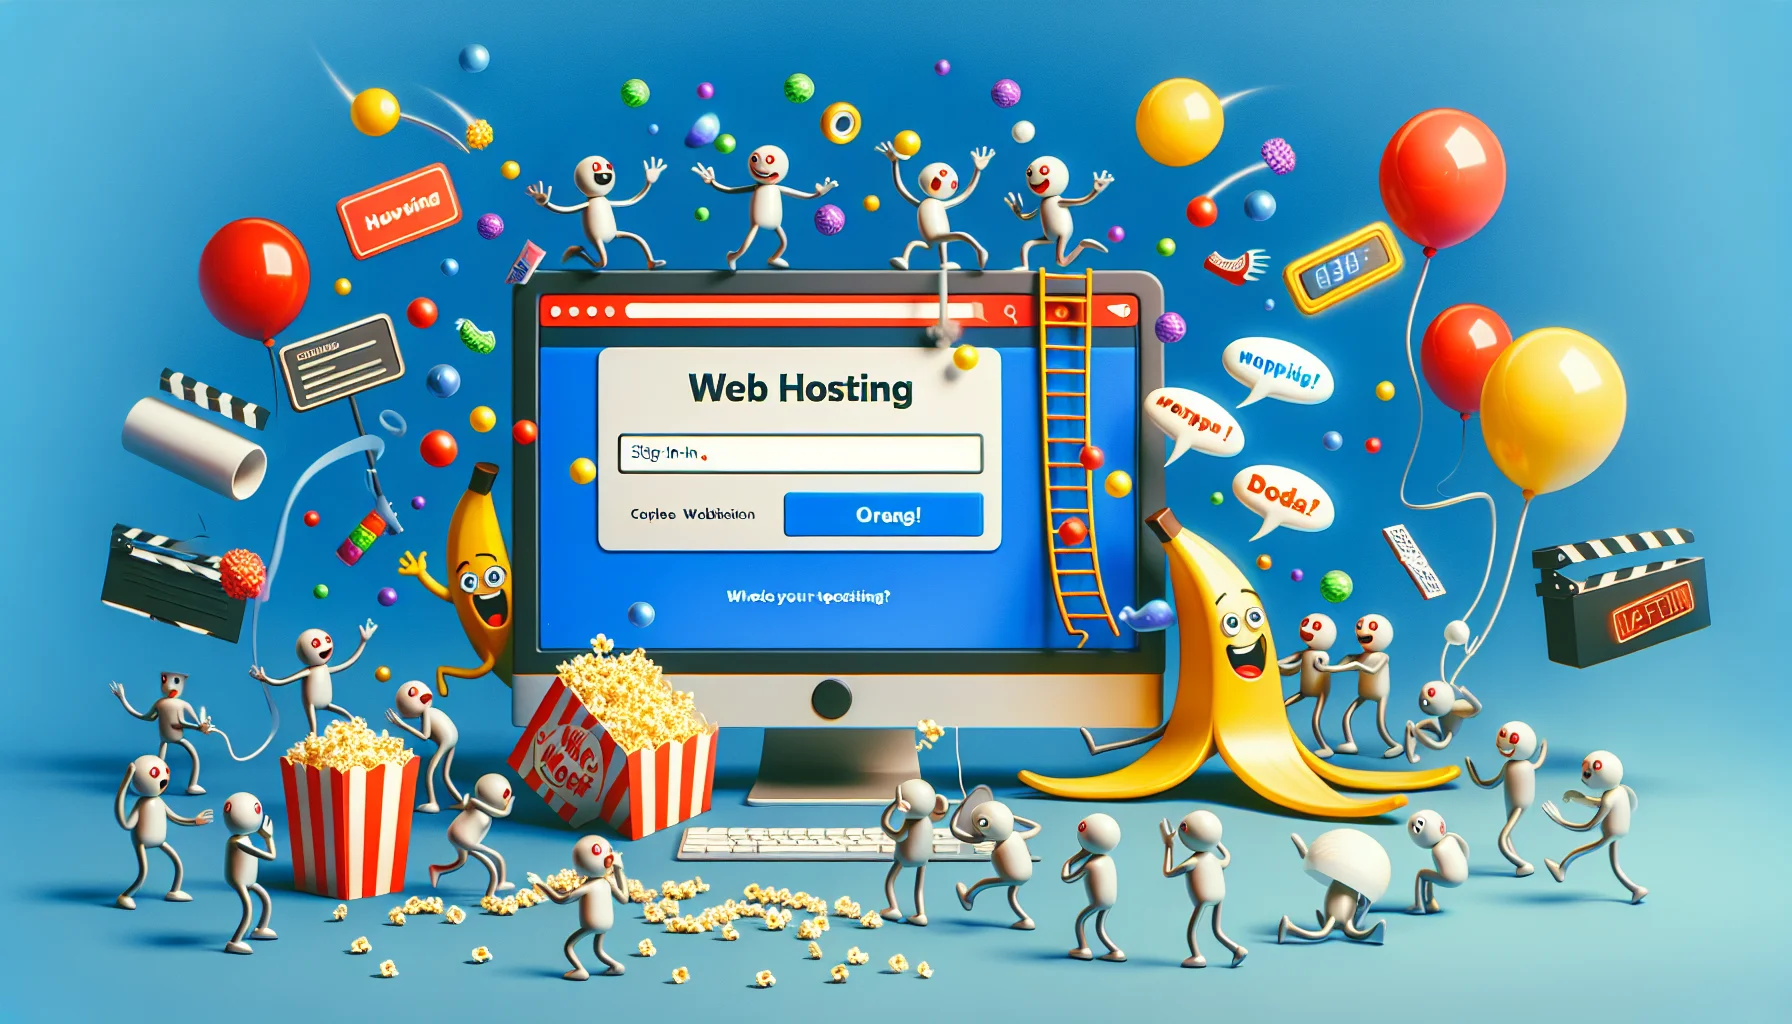 Create a comical and tempting scene revolving around web hosting. In the image, a computer screen displays the sign-in page for a popular web hosting company. Around the computer, various website elements like menus, widgets, and buttons are coming to life, stepping out of the screen, and contributing to the humorous atmosphere. One of these elements can be seen slipping on a banana peel, while another is juggling colorful dots, representing data. Some website elements are observing the happenings and laughing, with some even holding popcorn boxes. This reflects the exciting and dynamic nature of web hosting.